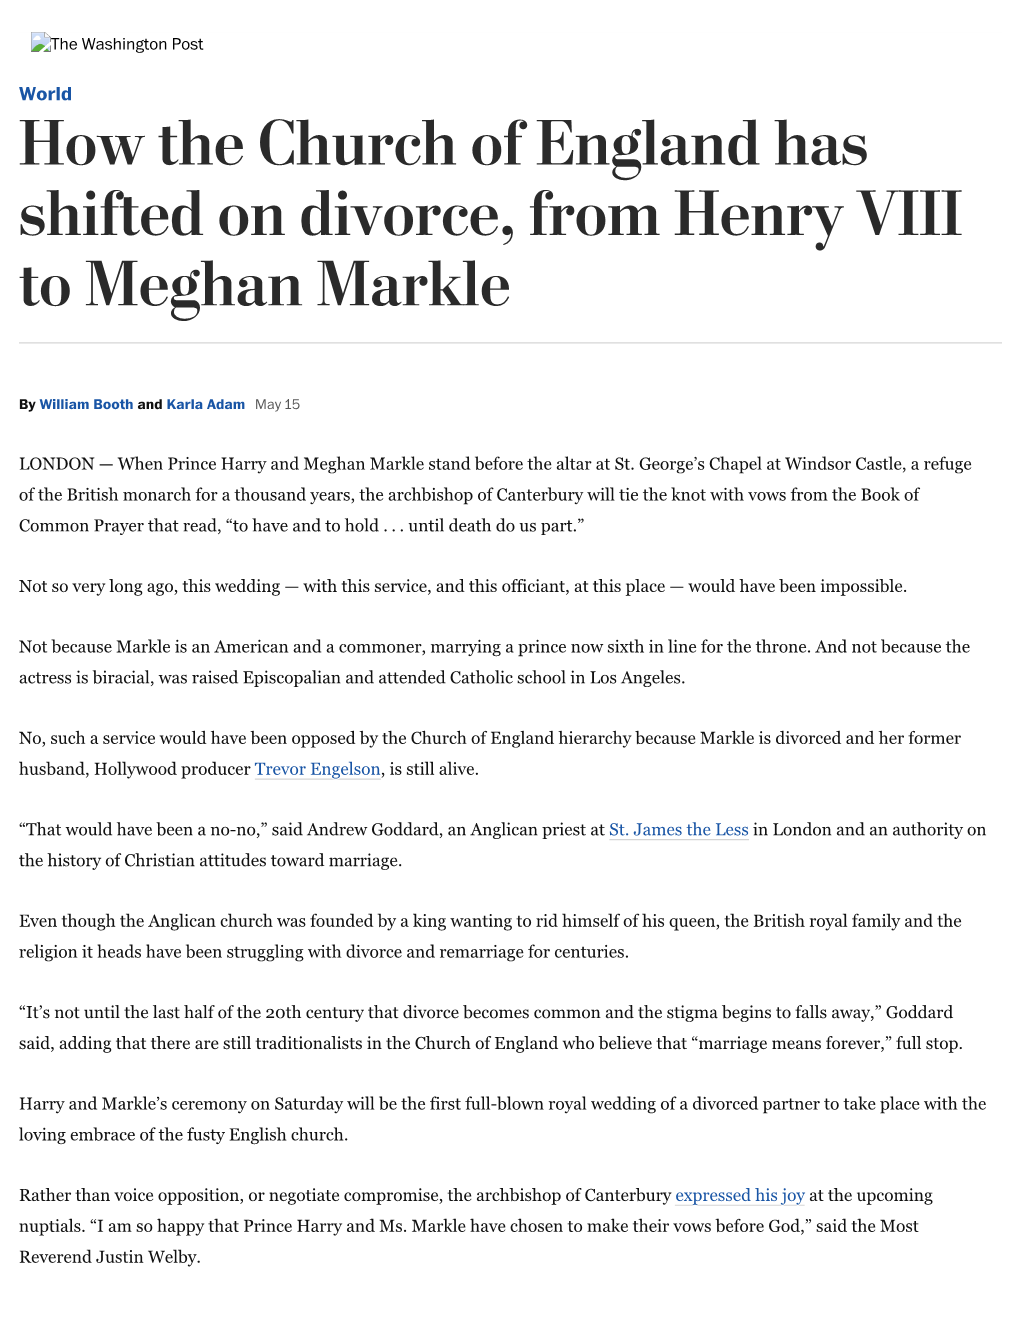 How the Church of England Has Shifted on Divorce, from Henry VIII to Meghan Markle